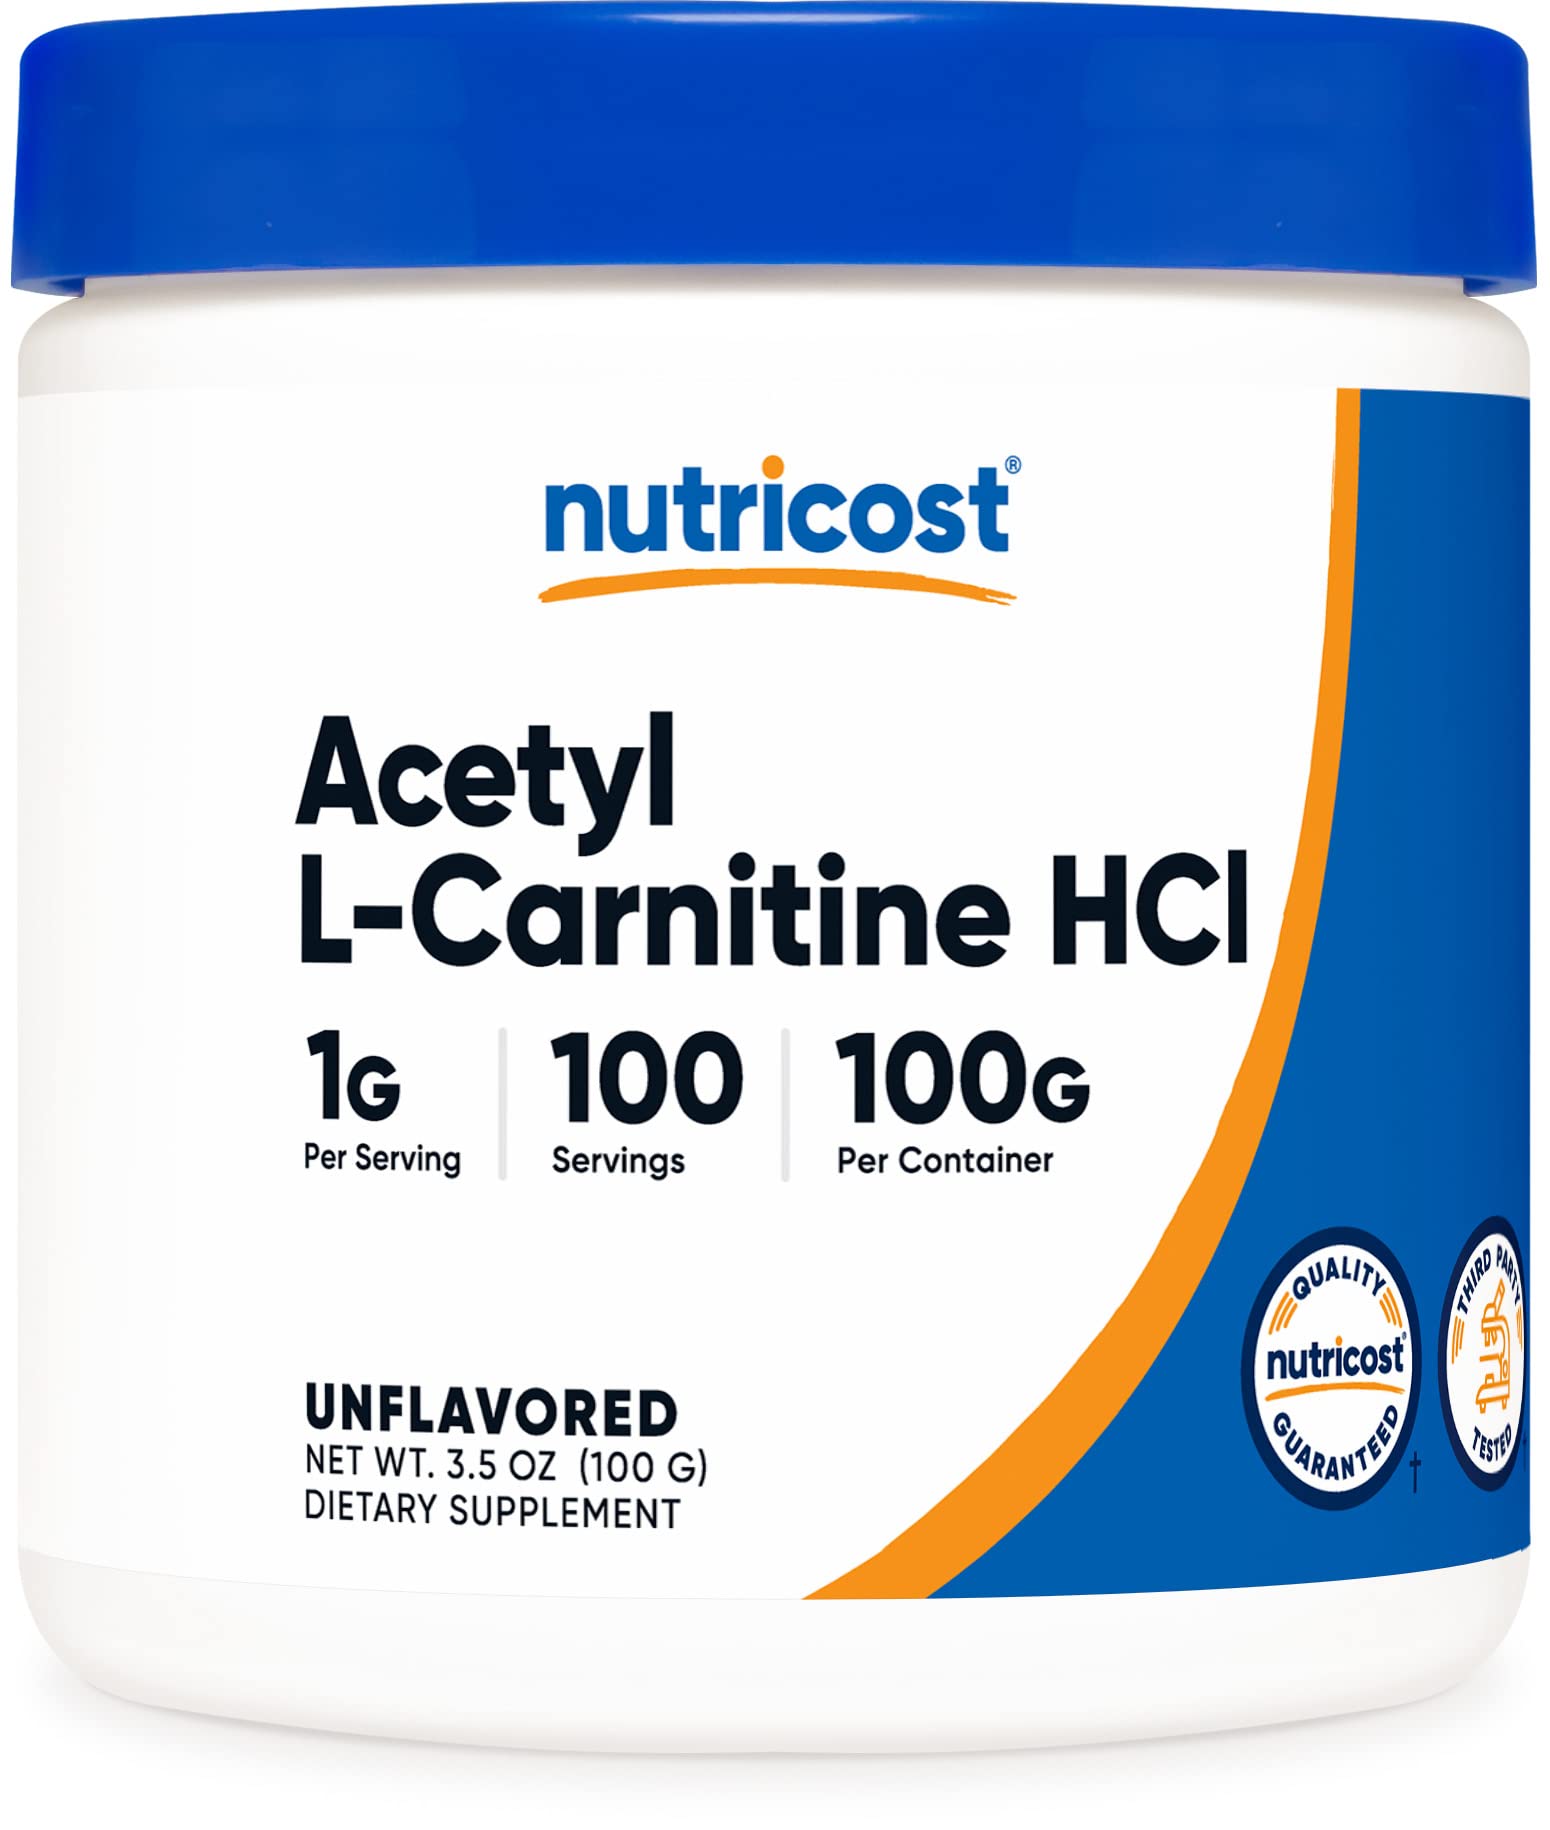 Book Cover Nutricost Acetyl L-Carnitine (ALCAR) 100 Grams - 1000mg Per Serving - Non-GMO, Gluten Free, Acetyl L-Carnitine Powder 3.52 Ounce (Pack of 1)